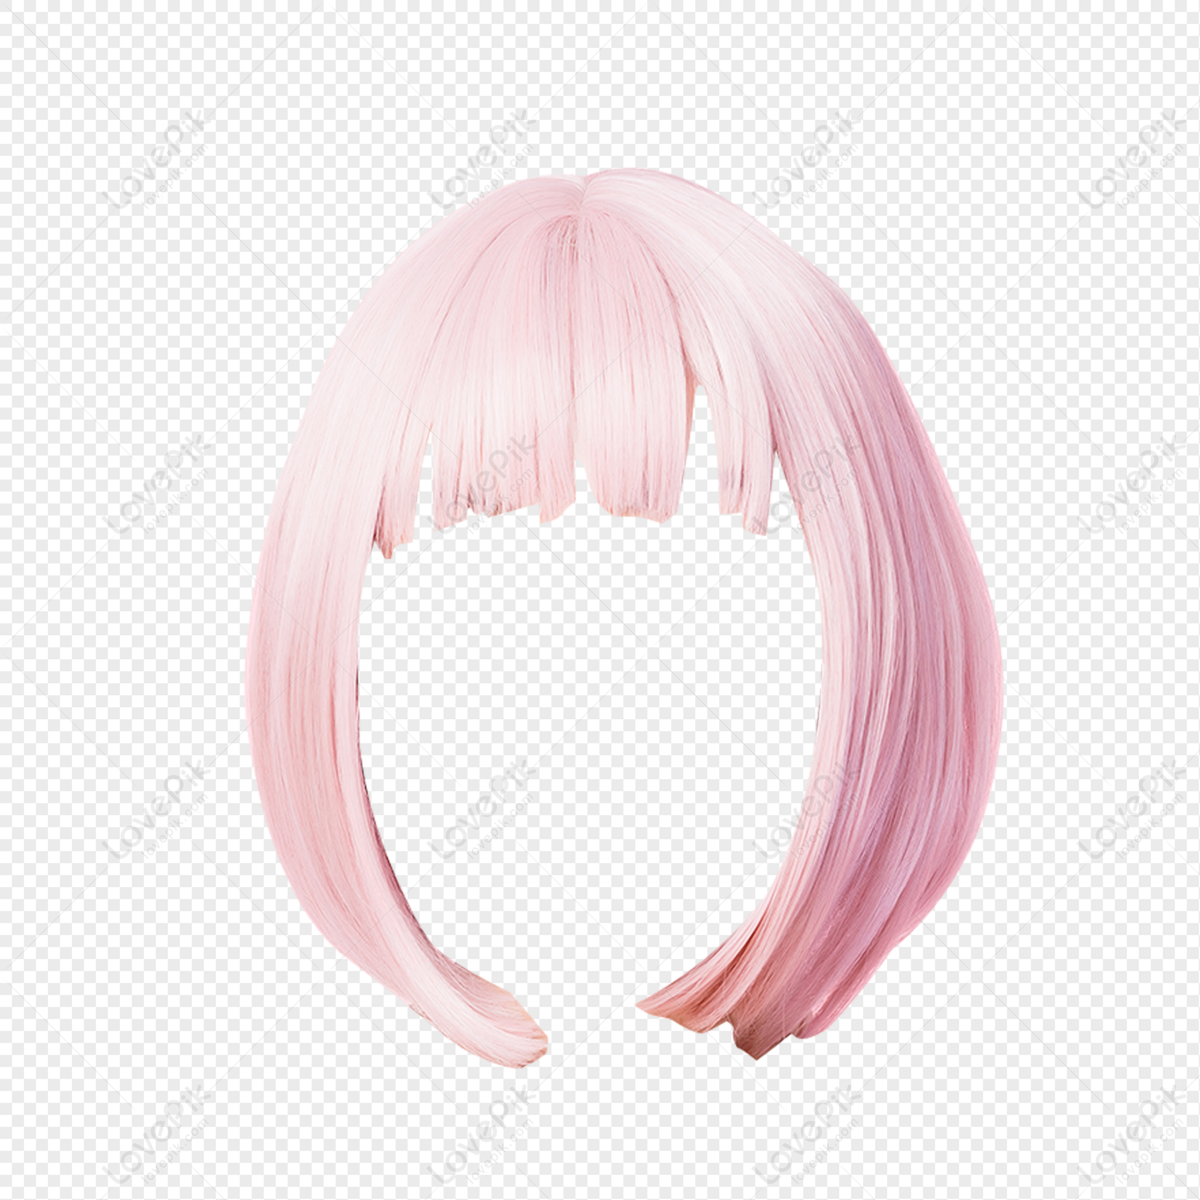 Pink Lady Hair Hairstyle Wig PNG Transparent And Clipart Image For Free  Download - Lovepik | 401770186